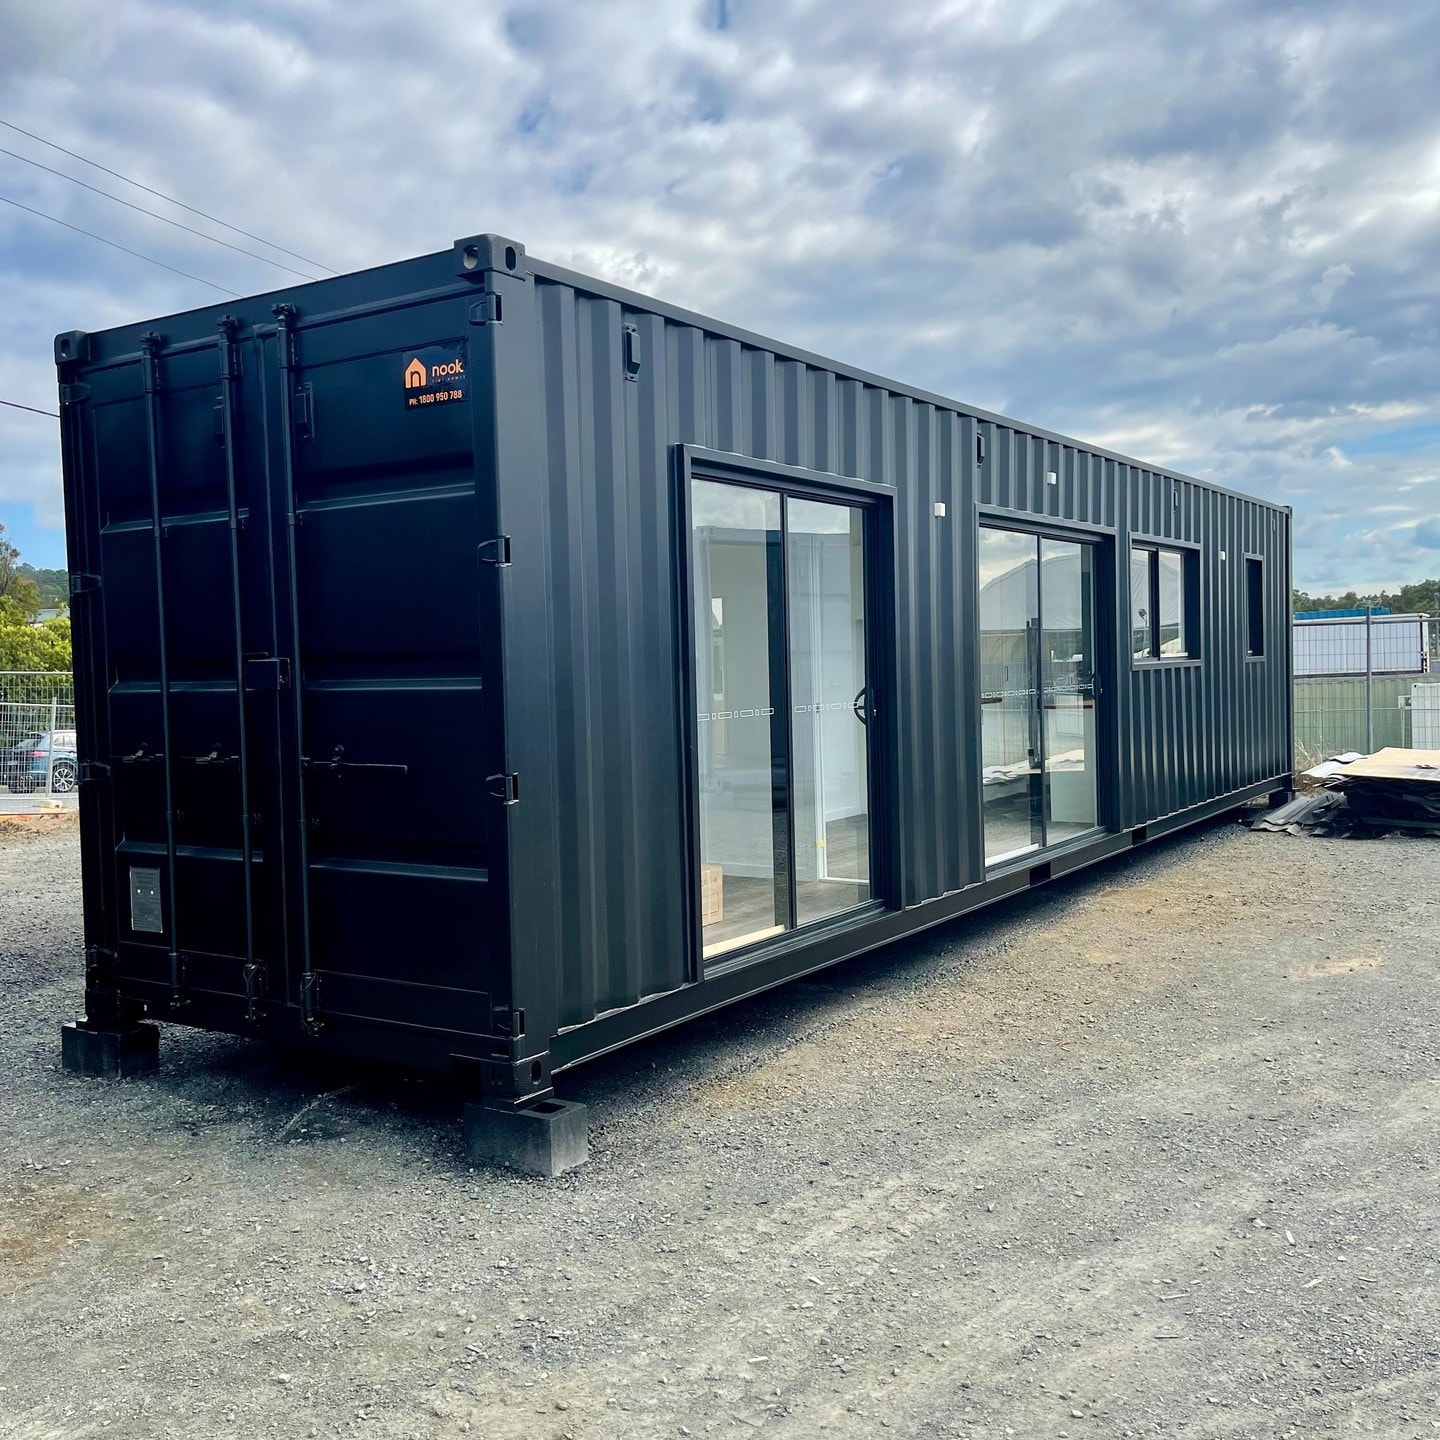 https://s1.cdn.autoevolution.com/images/news/two-bedroom-container-home-blends-urban-style-with-modern-luxury-217803_1.jpg